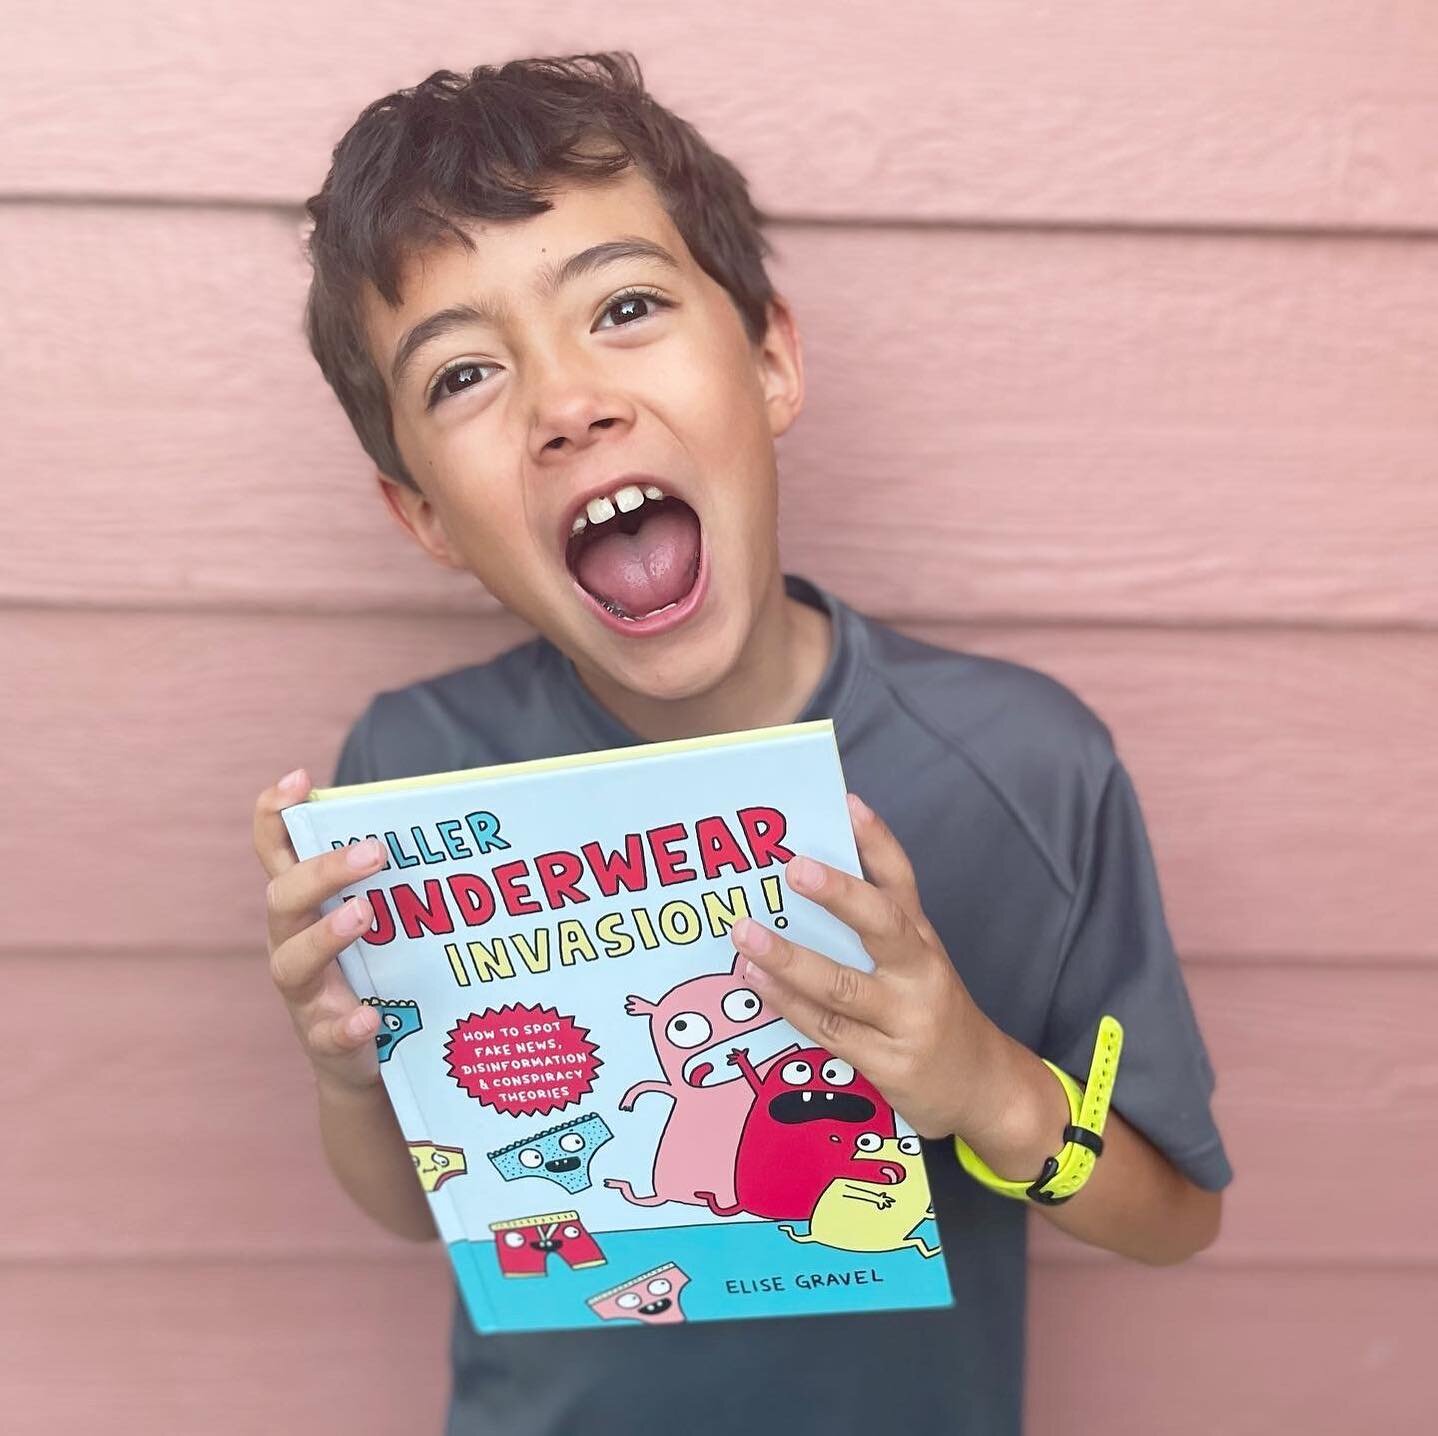 When KILLER UNDERWEAR INVASION arrived in our bookmail, I thought it was a mistake.  This isn't the type of picture book we share! ...or is it?  Encouraging critical thinking has always been part of our mission, and this book tackles just that.

Writ